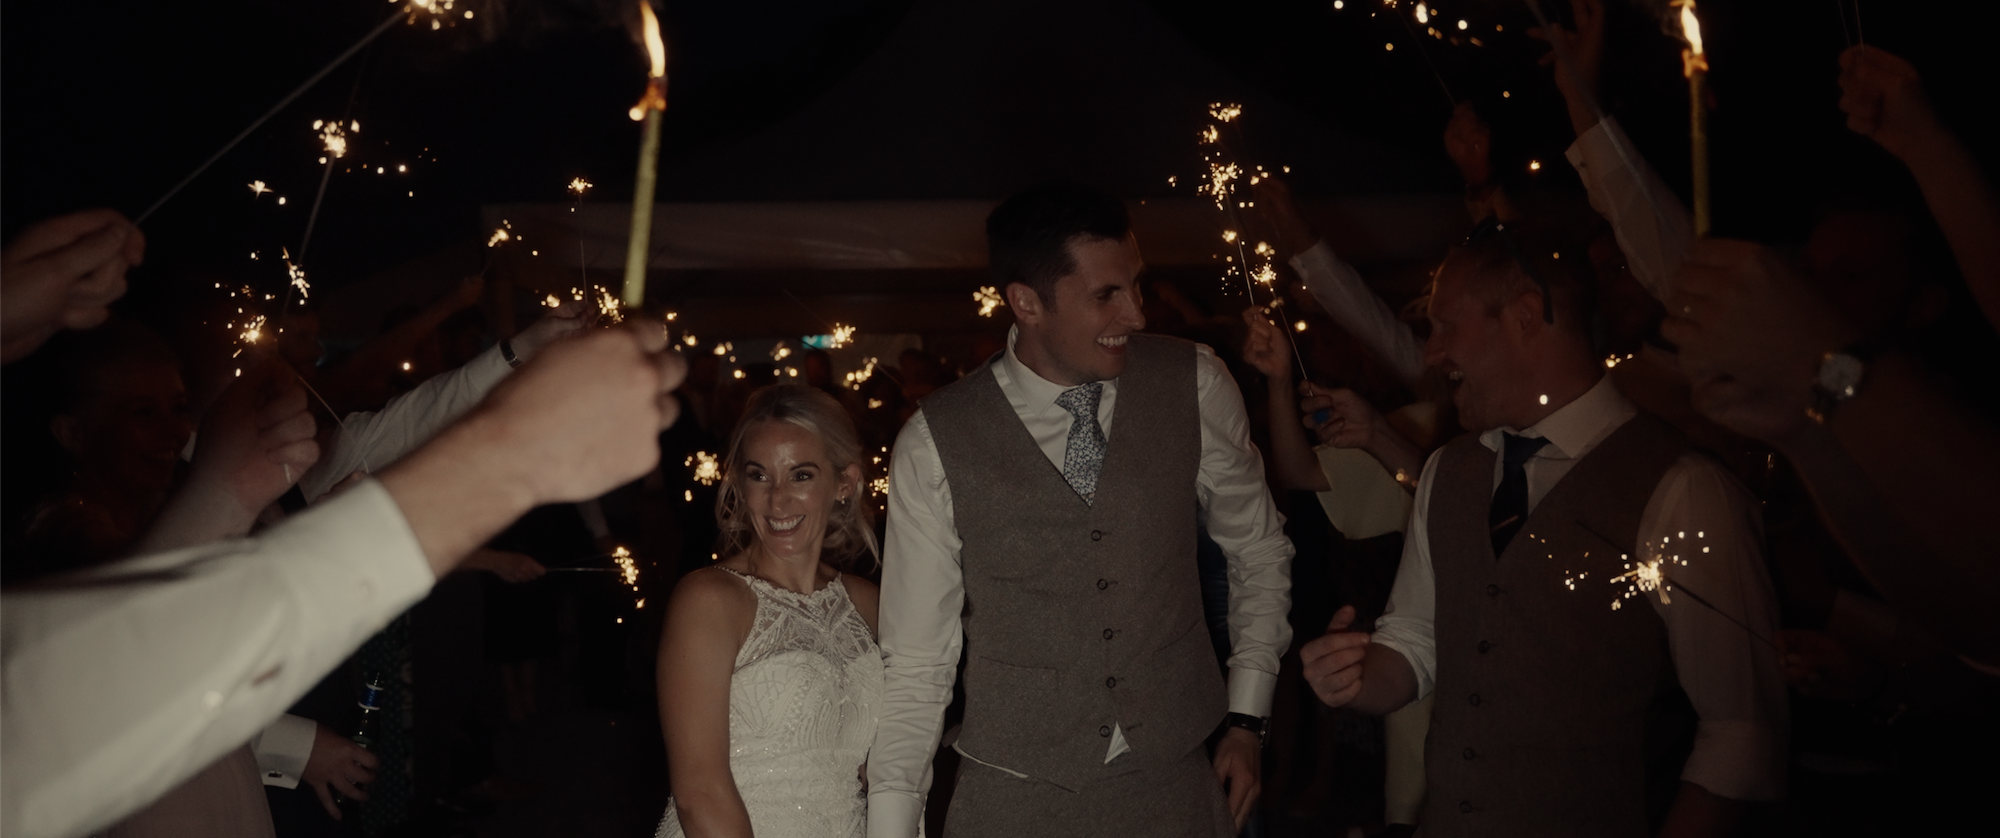 Oxwich Bay Hotel Wedding Videography by Ben Holbrook Films (Swansea South Wales).jpeg42.png